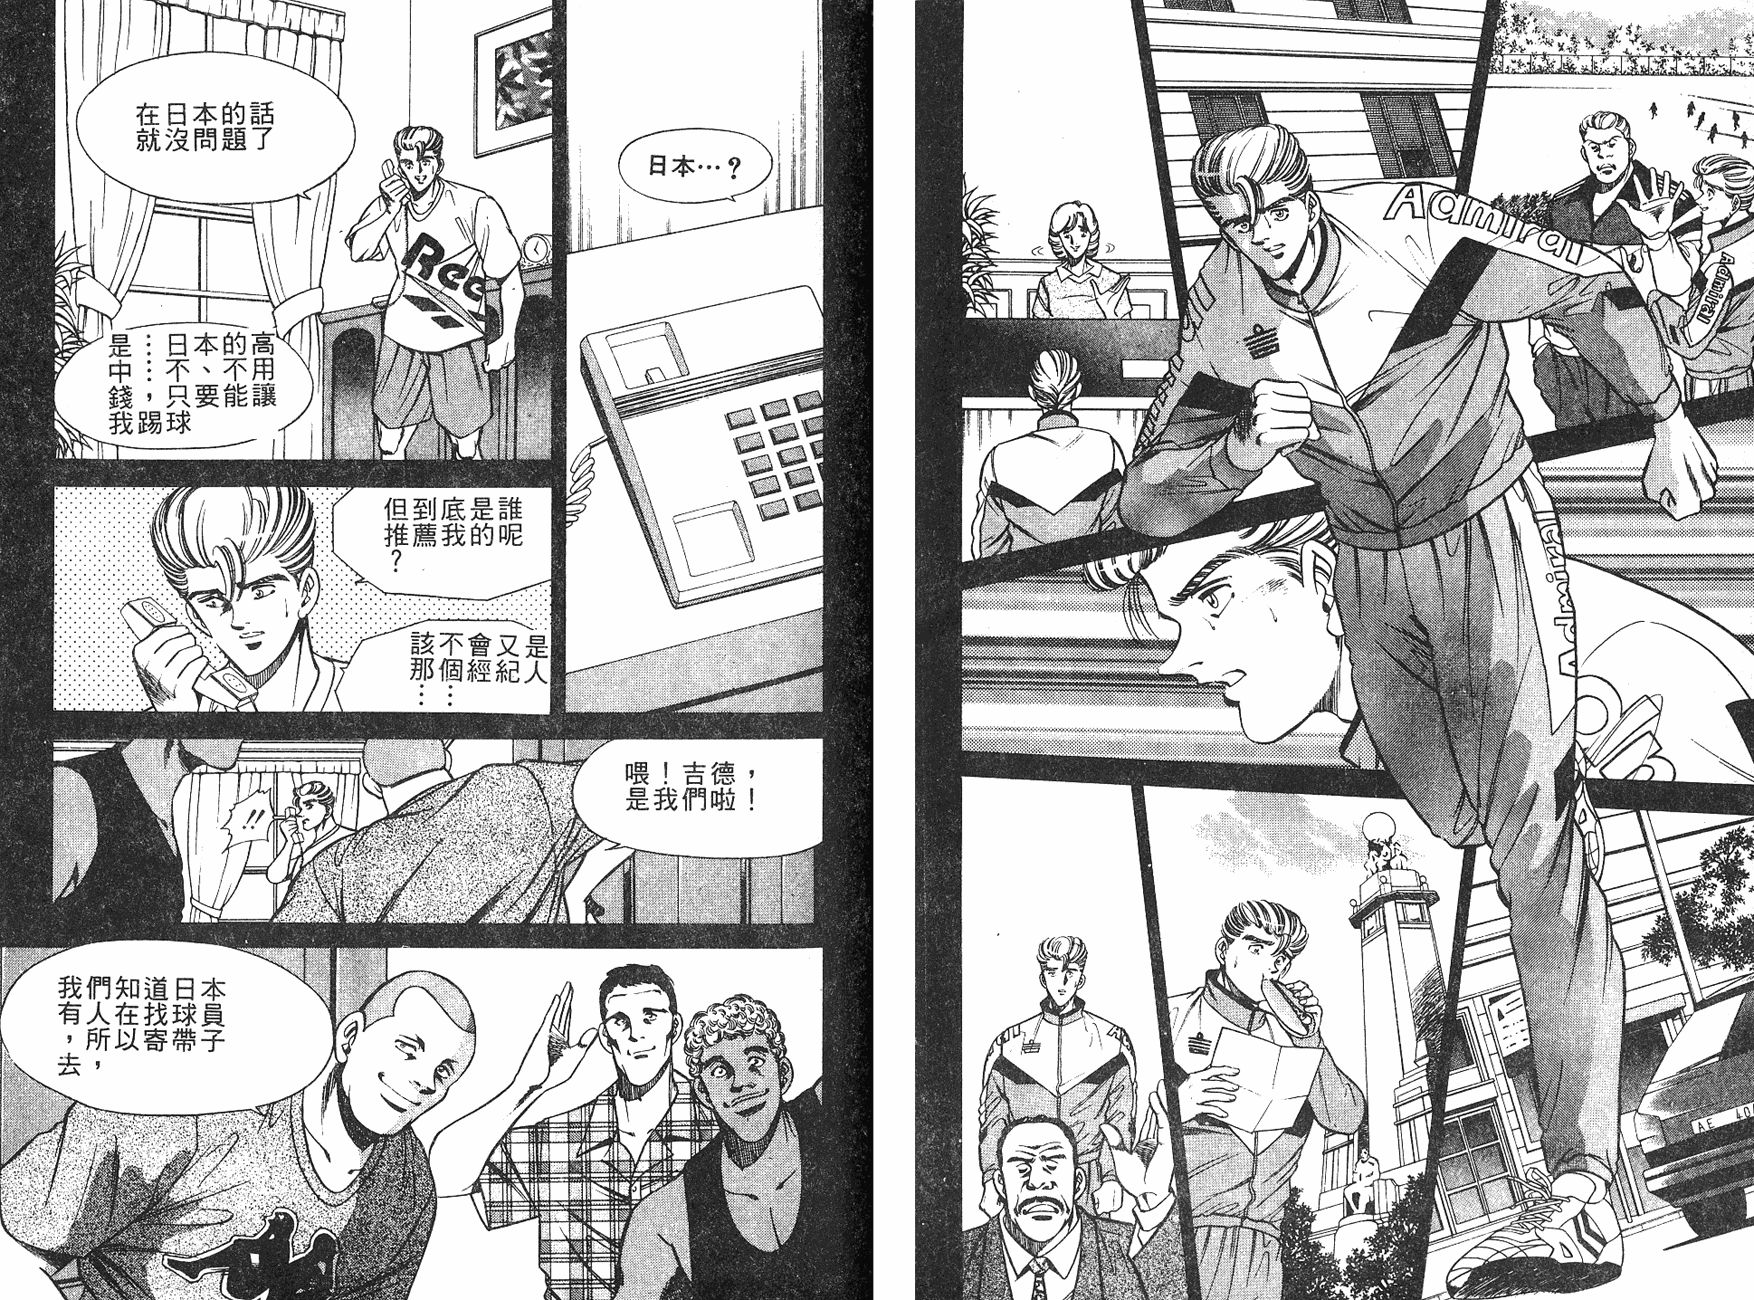 Two Top - 第02卷(1/3) - 3